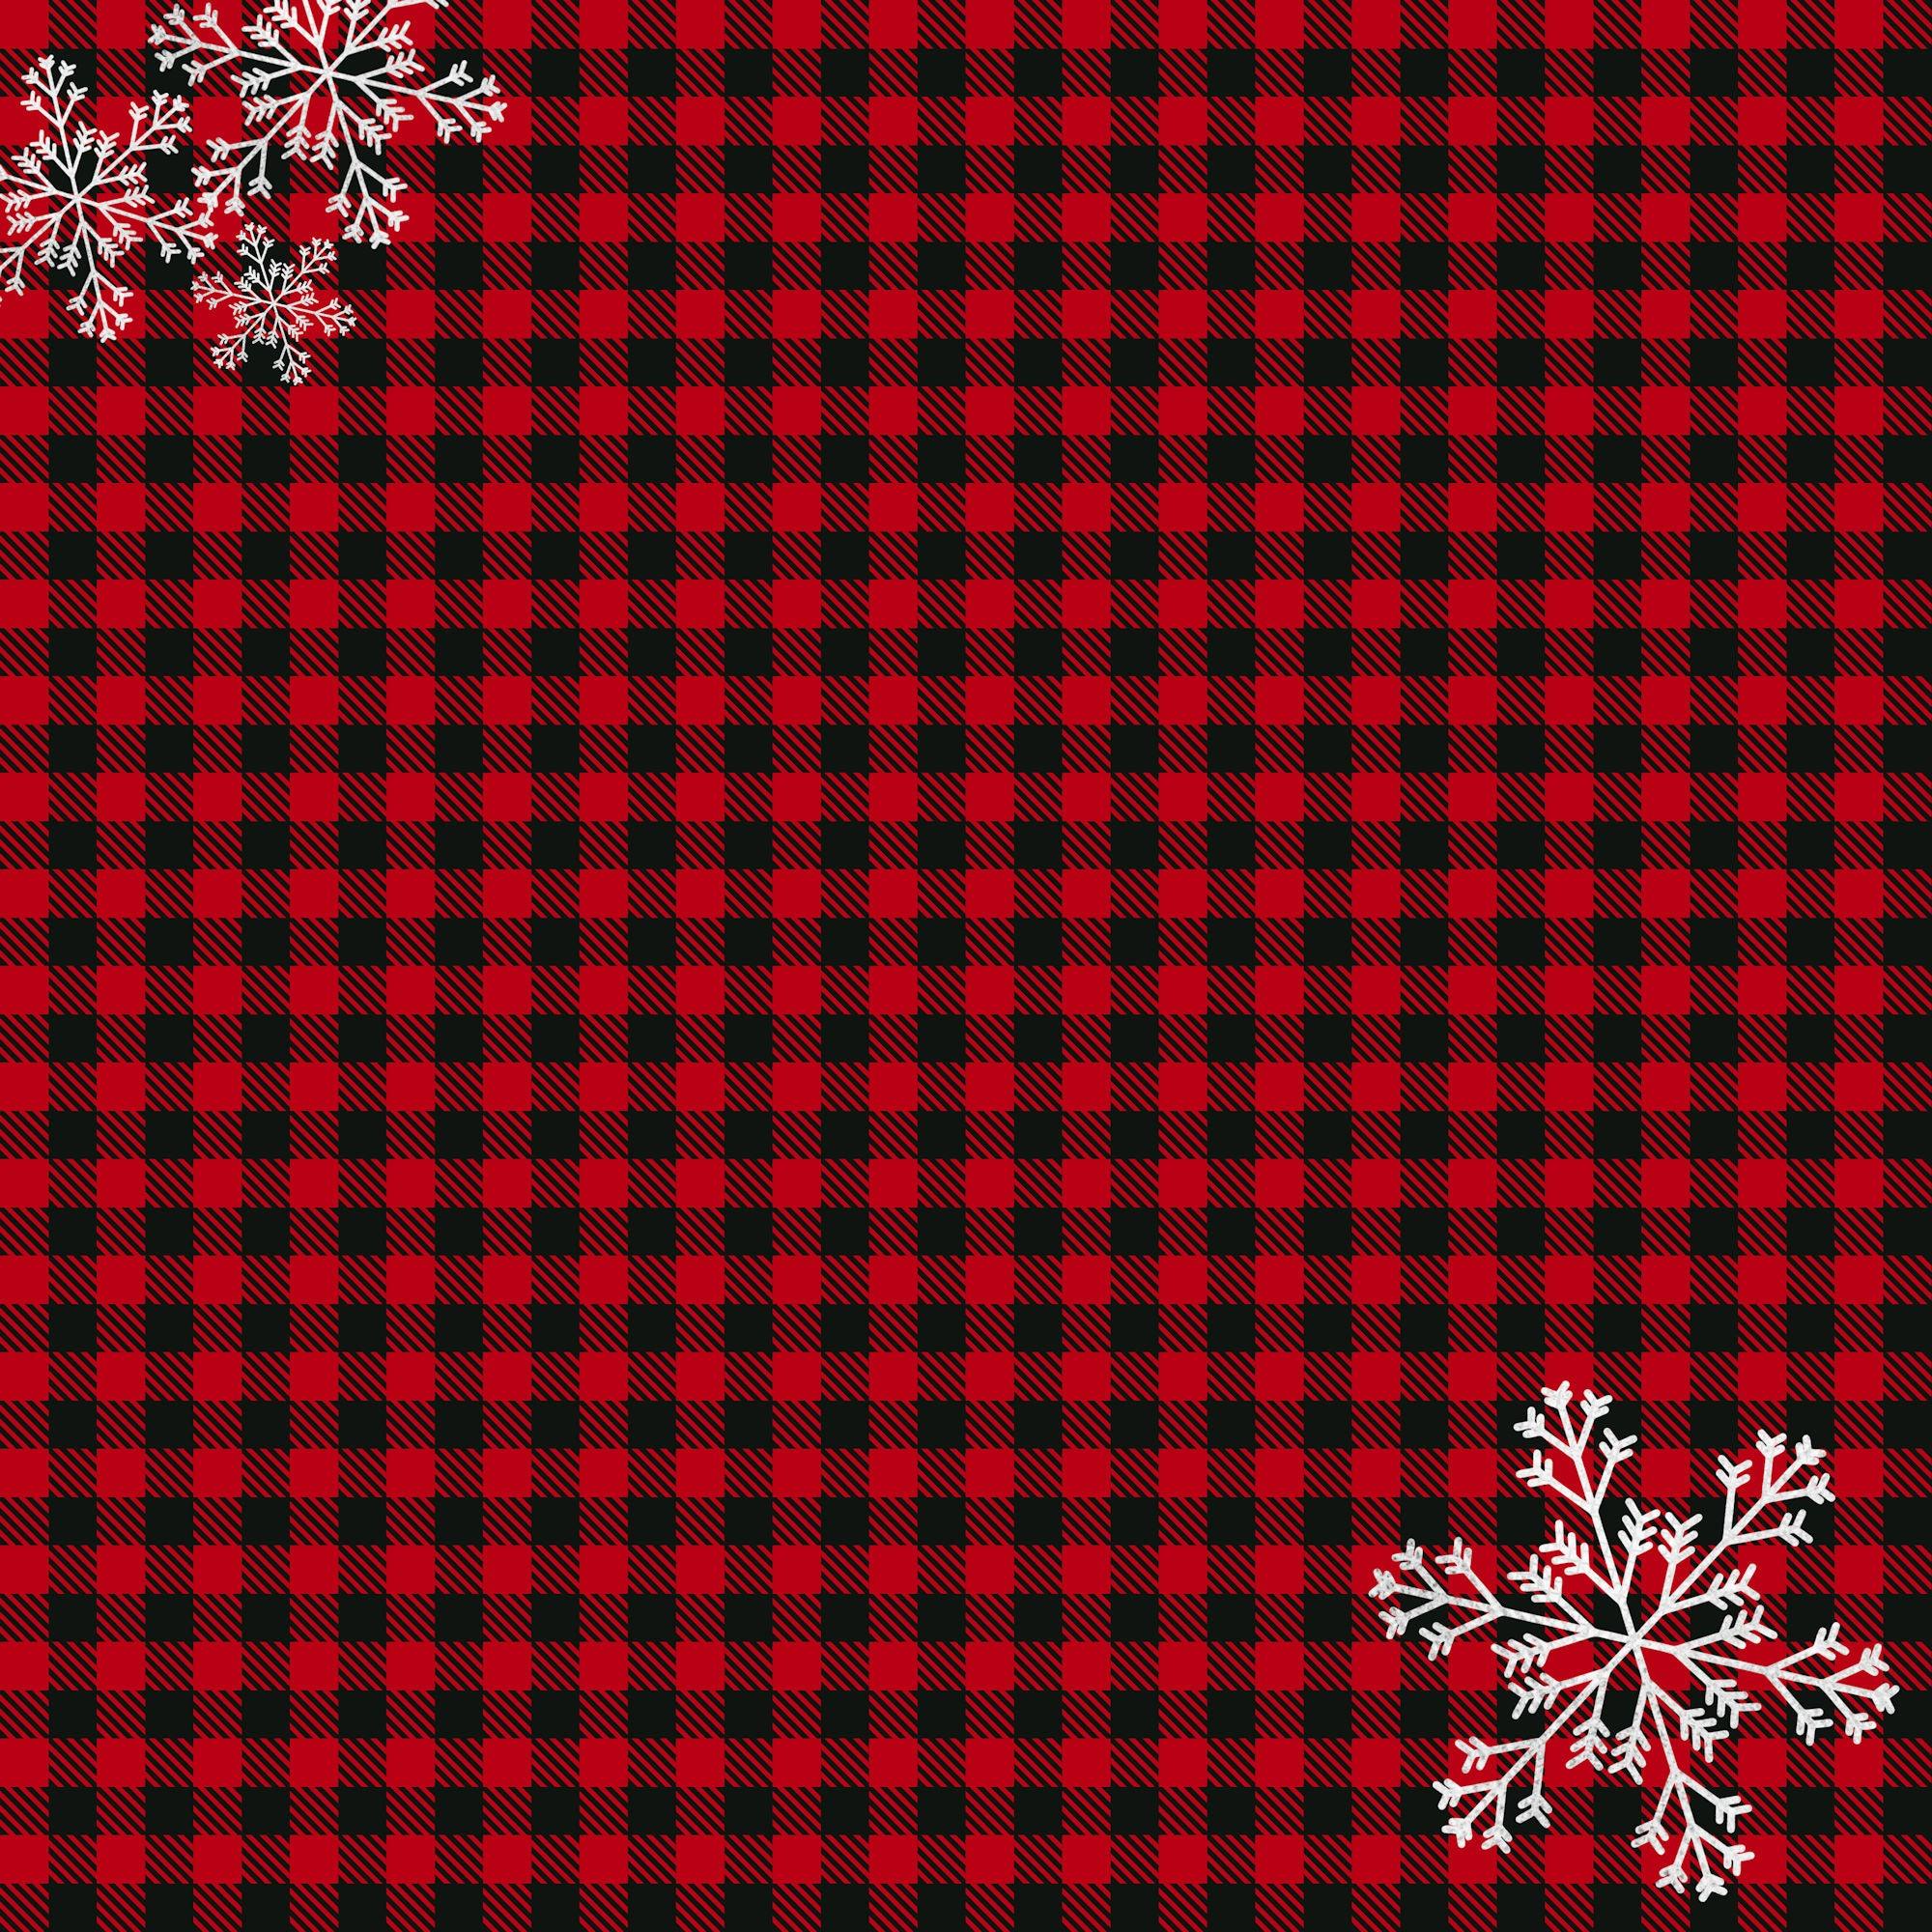 Buffalo Plaid Christmas Mini Collection Snowflakes 12 x 12 Double-Sided Scrapbook Paper by SSC Designs - Scrapbook Supply Companies